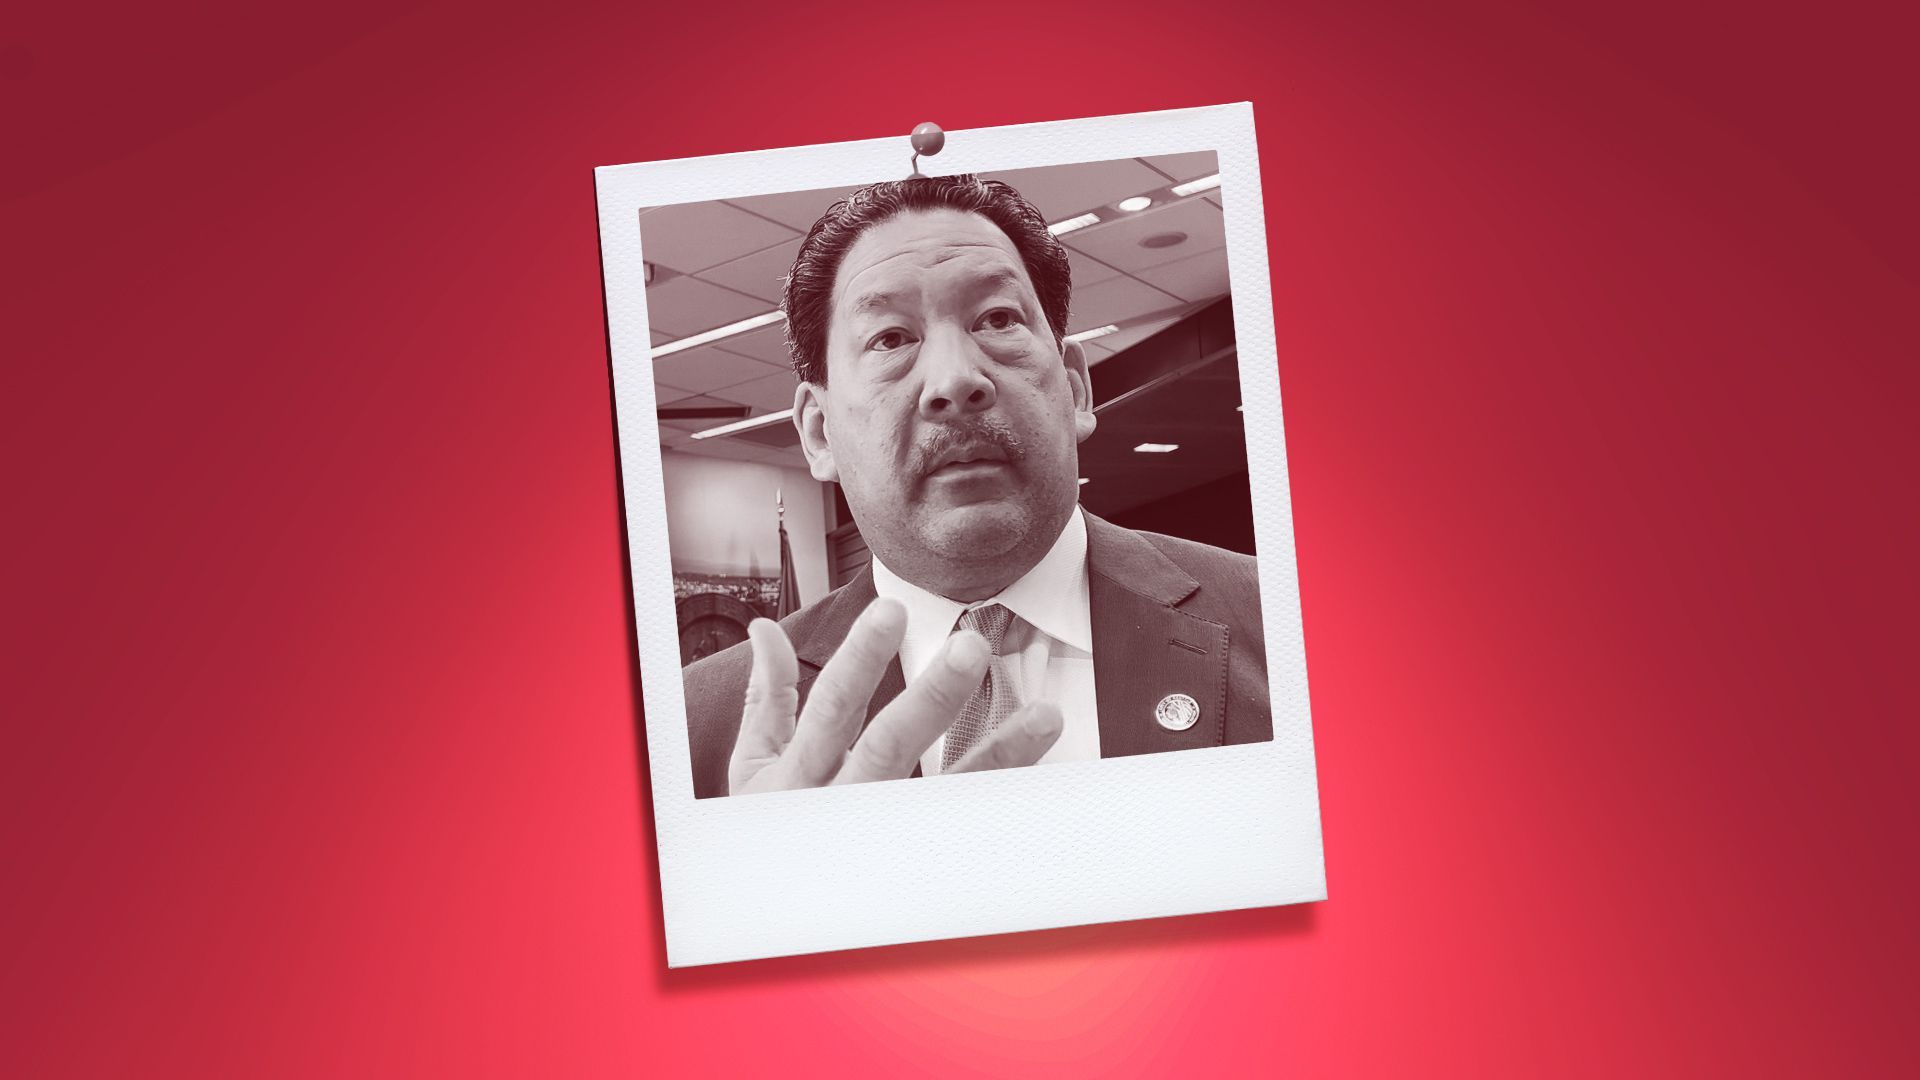 Photo illustration of Seattle Mayor Bruce Harrell in an instant photo pinned to a red wall.